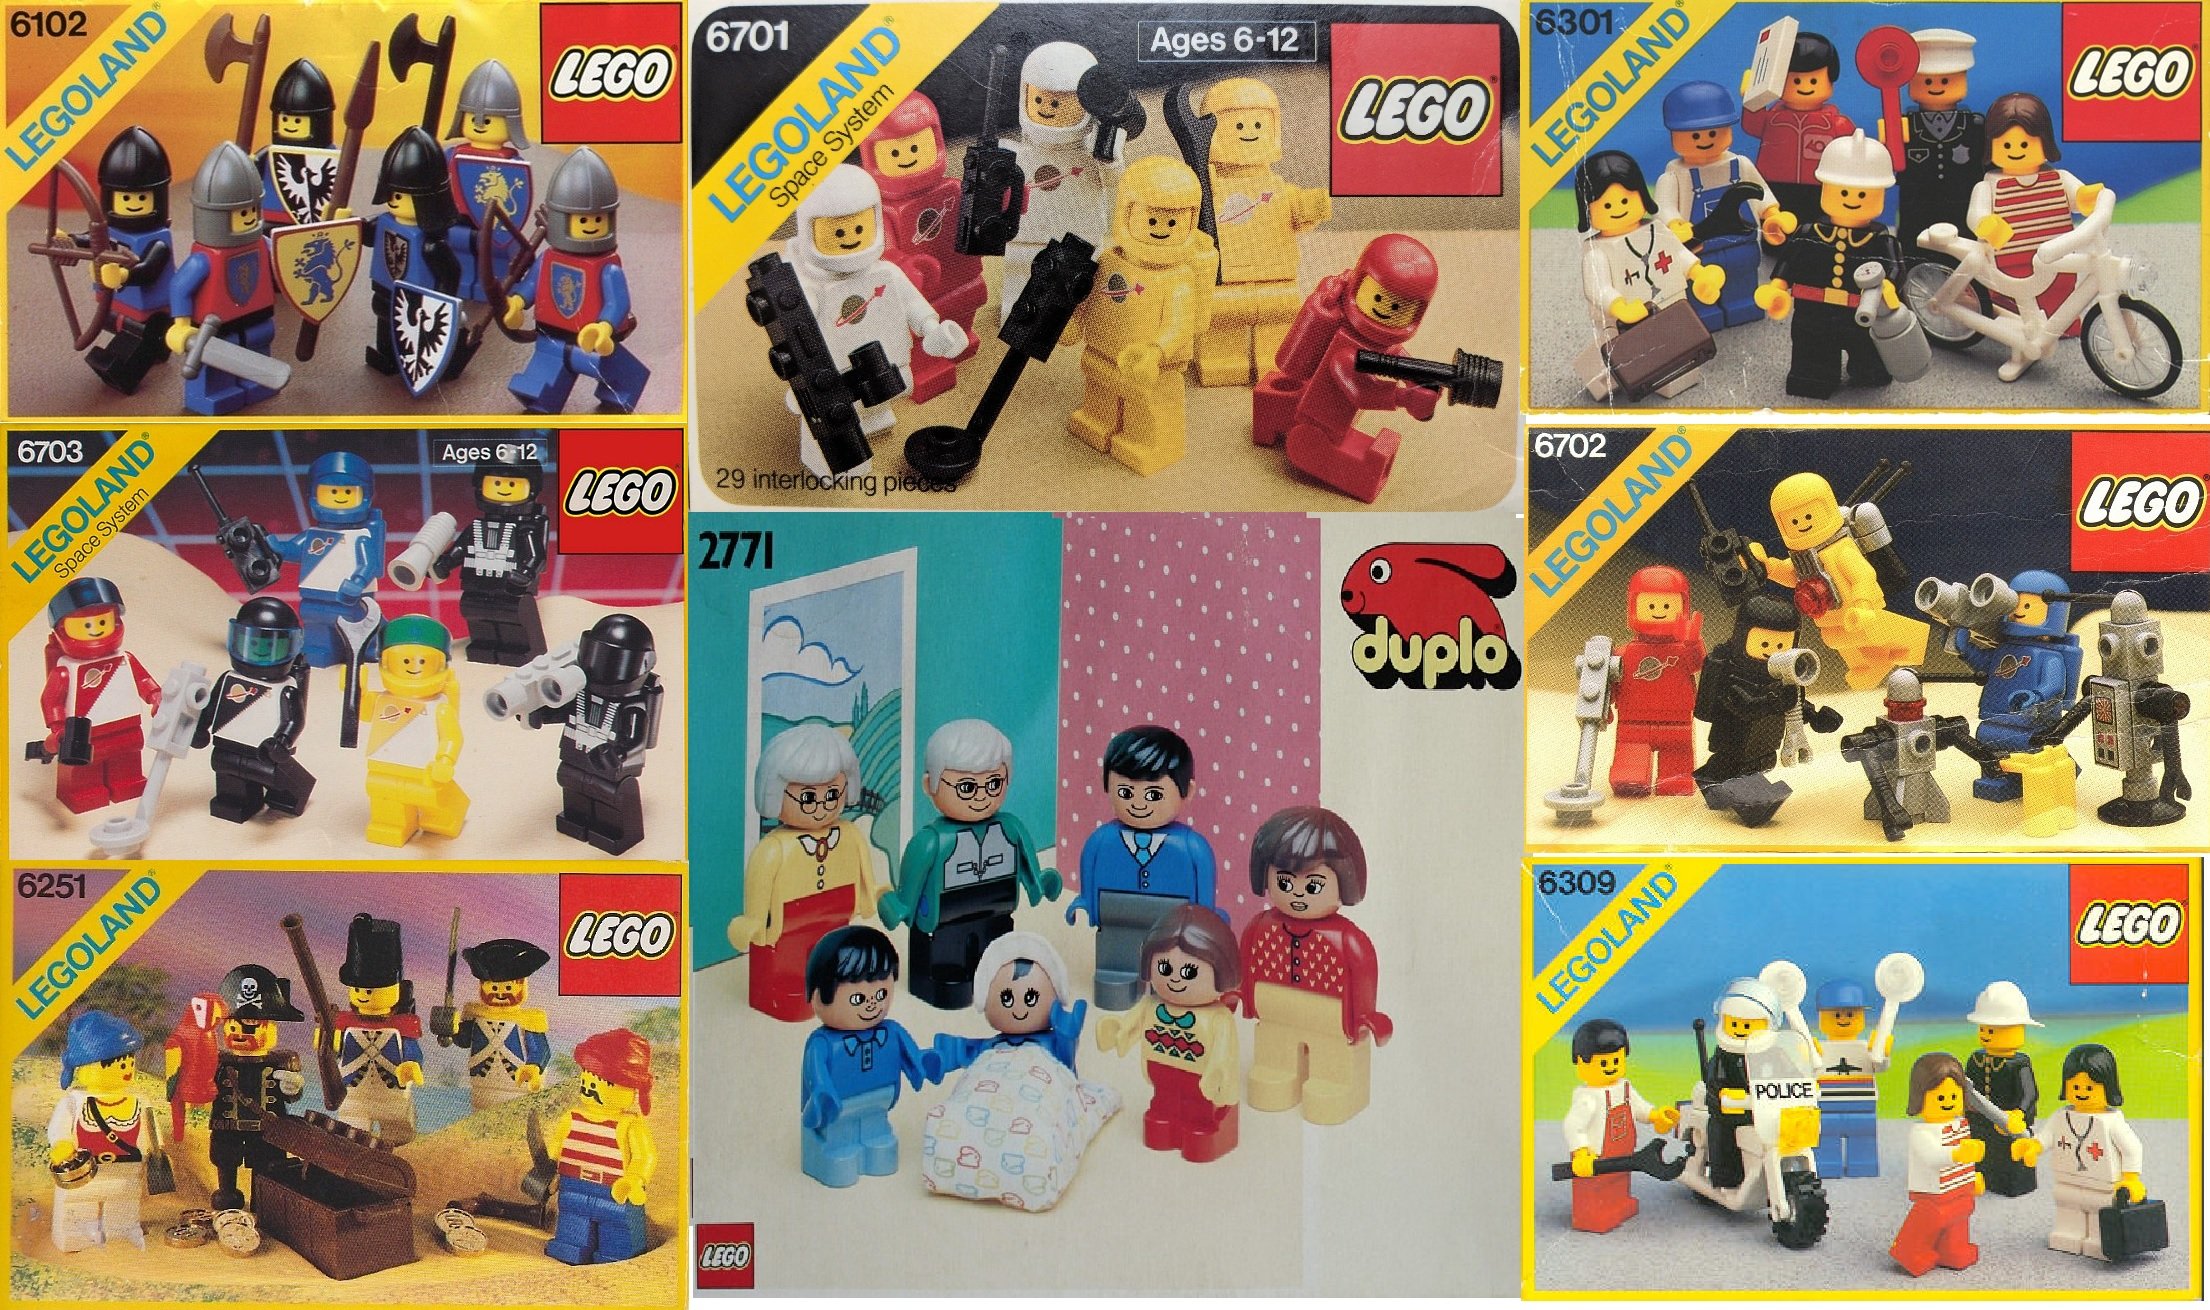 LEGO's Forgotten Collectible Minifigures - BrickNerd - All things